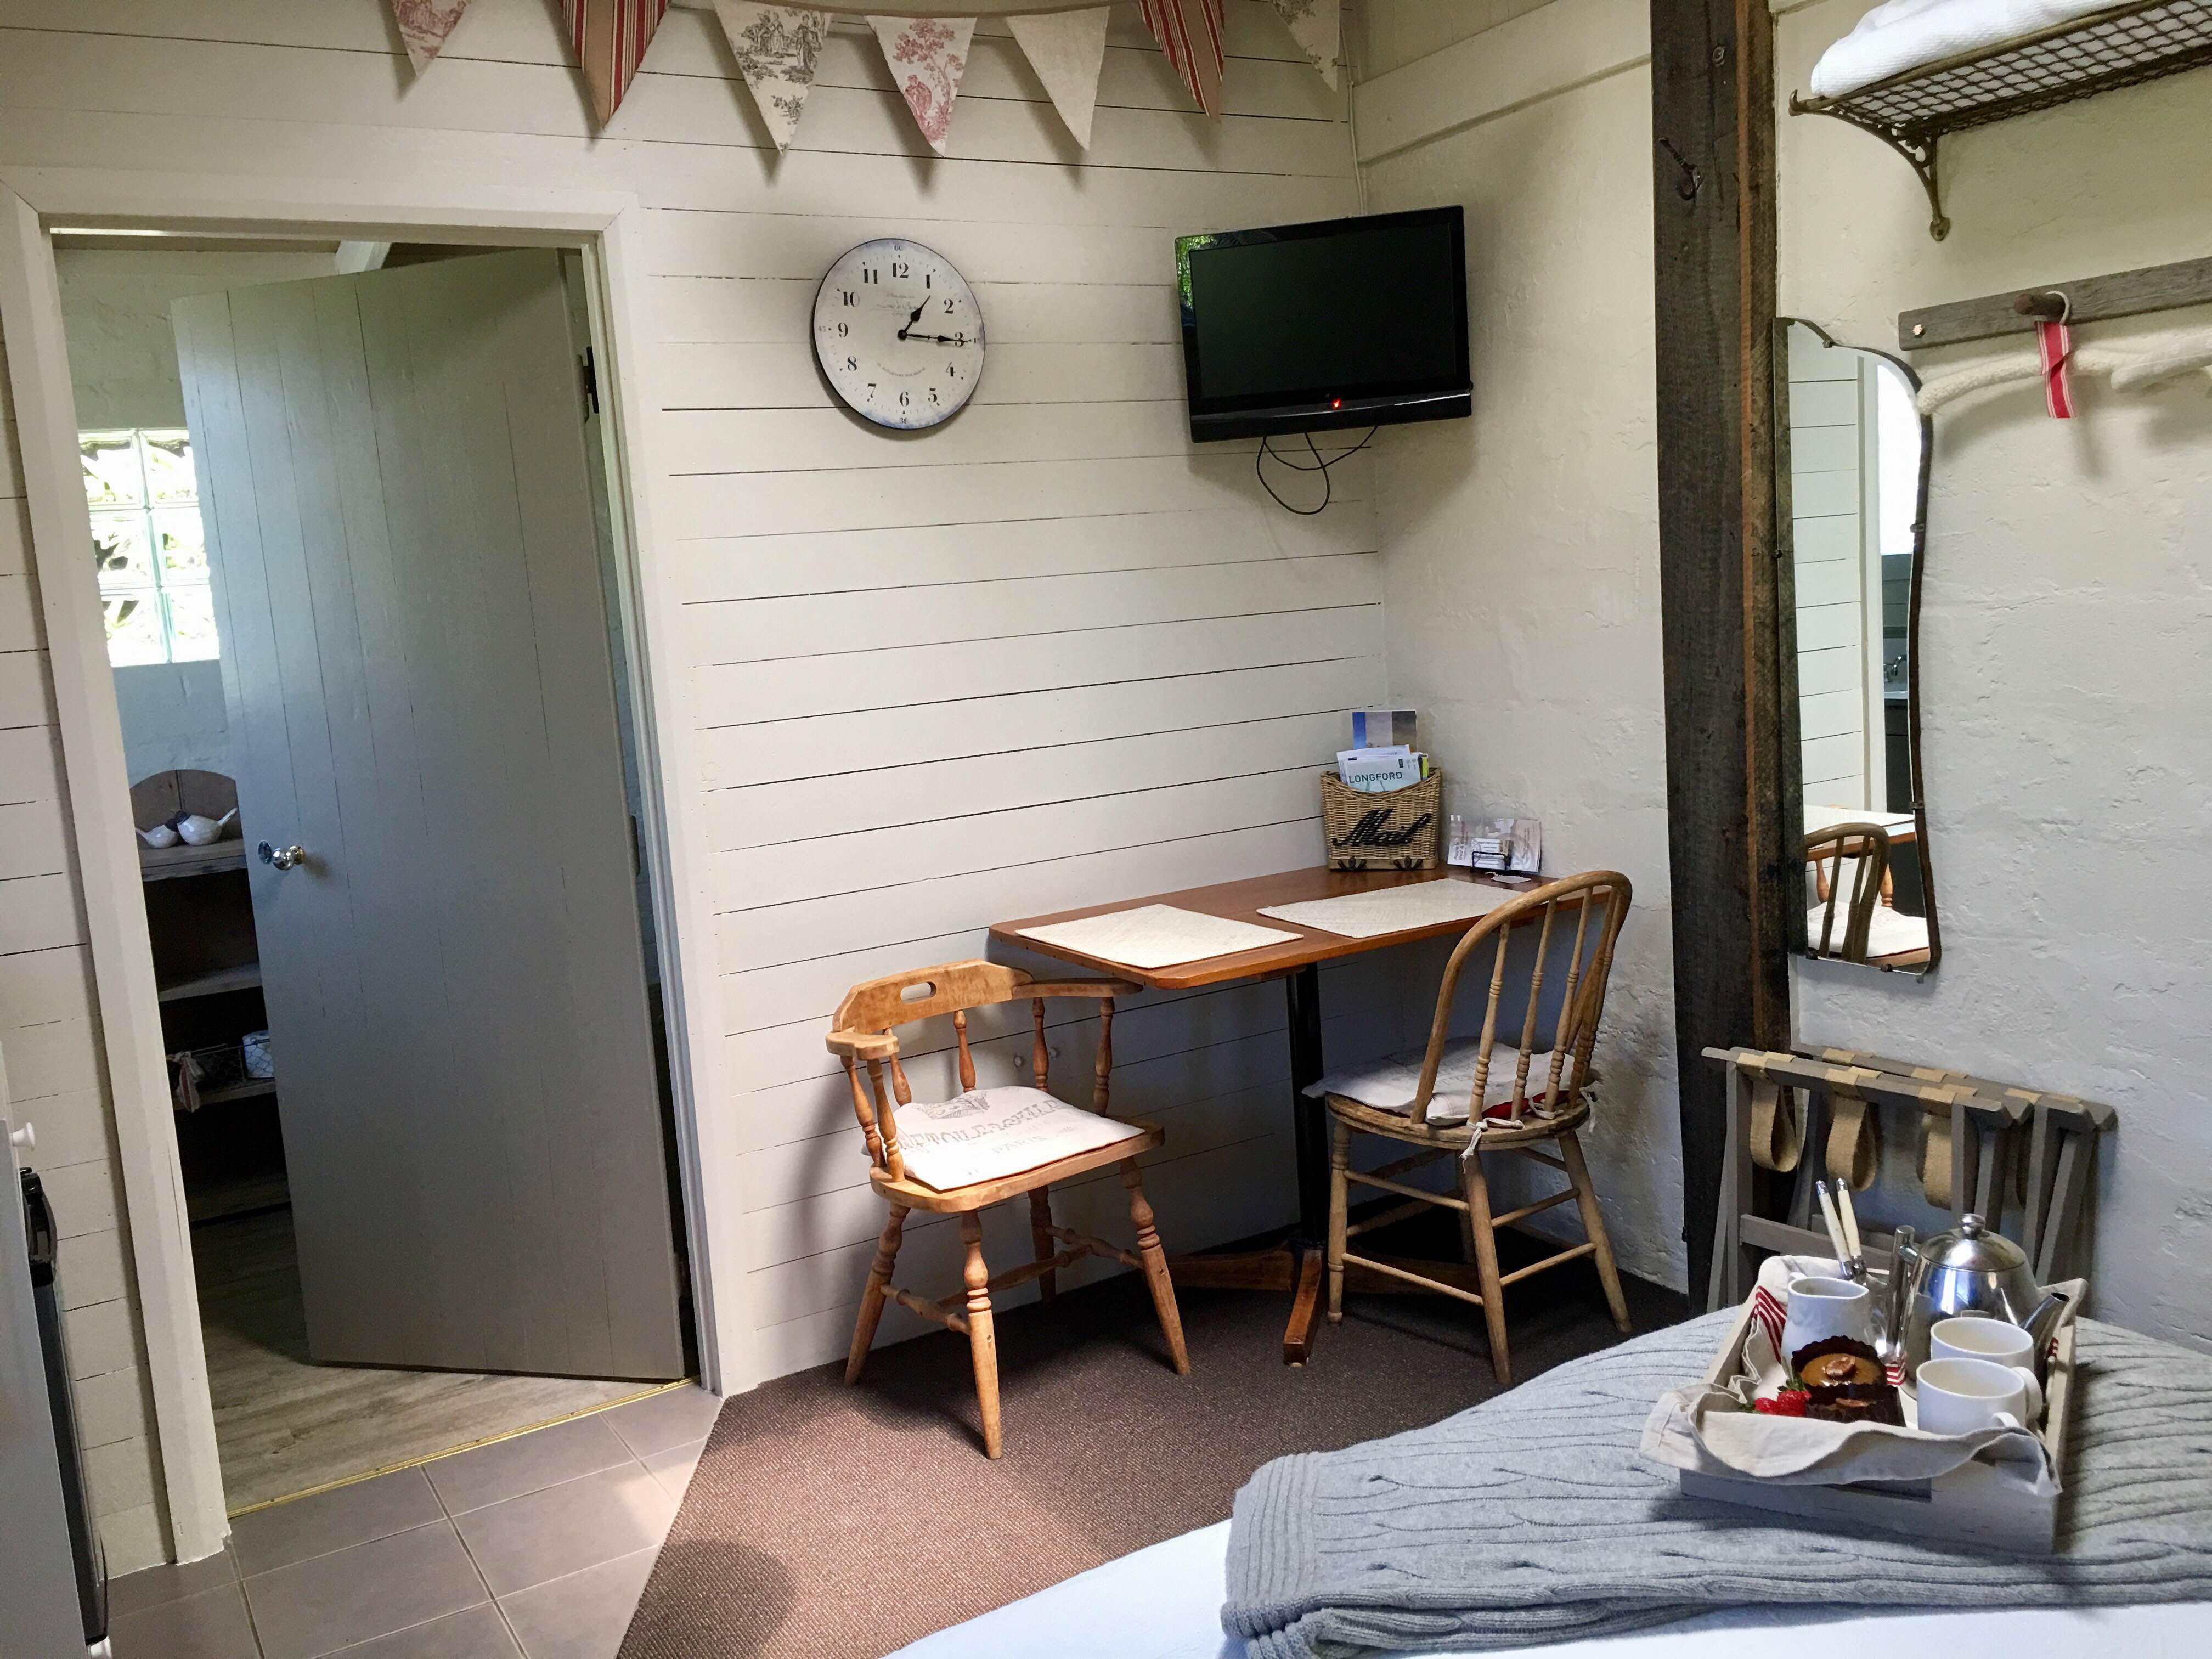 Aggies Bed And Breakfast - Accommodation NSW 2